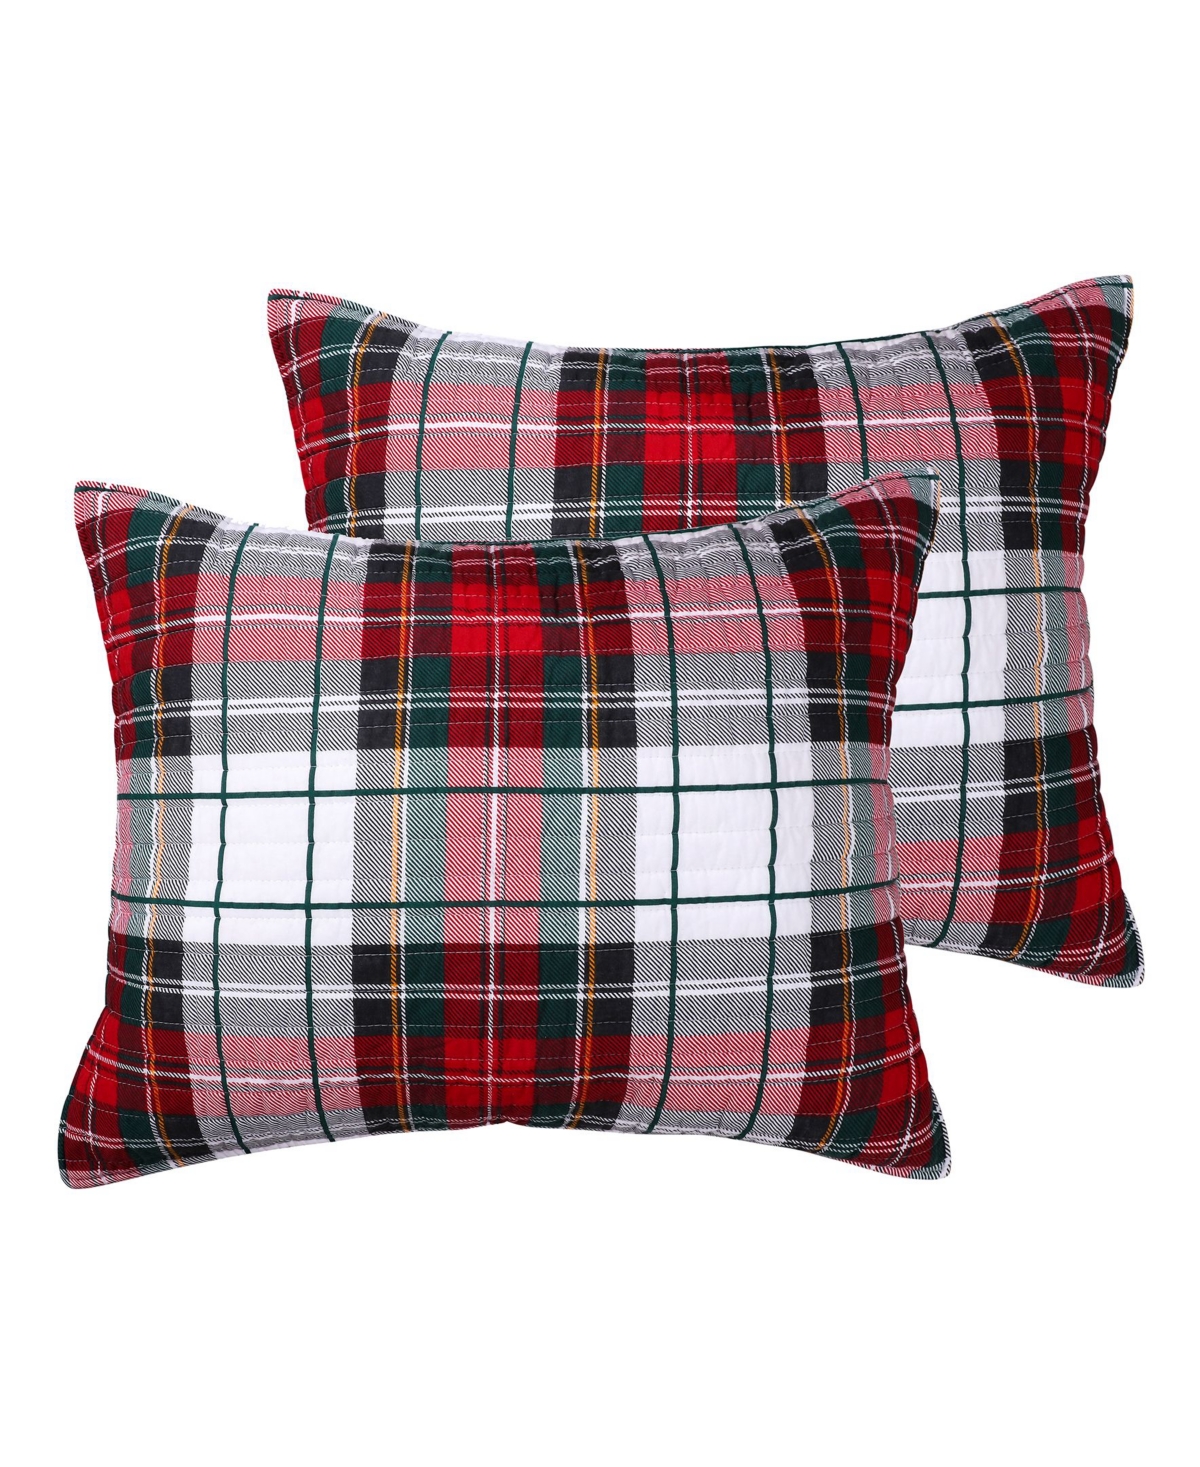 Spencer Red Plaid Quilted 2-Pc. Sham Set, Standard - Multi